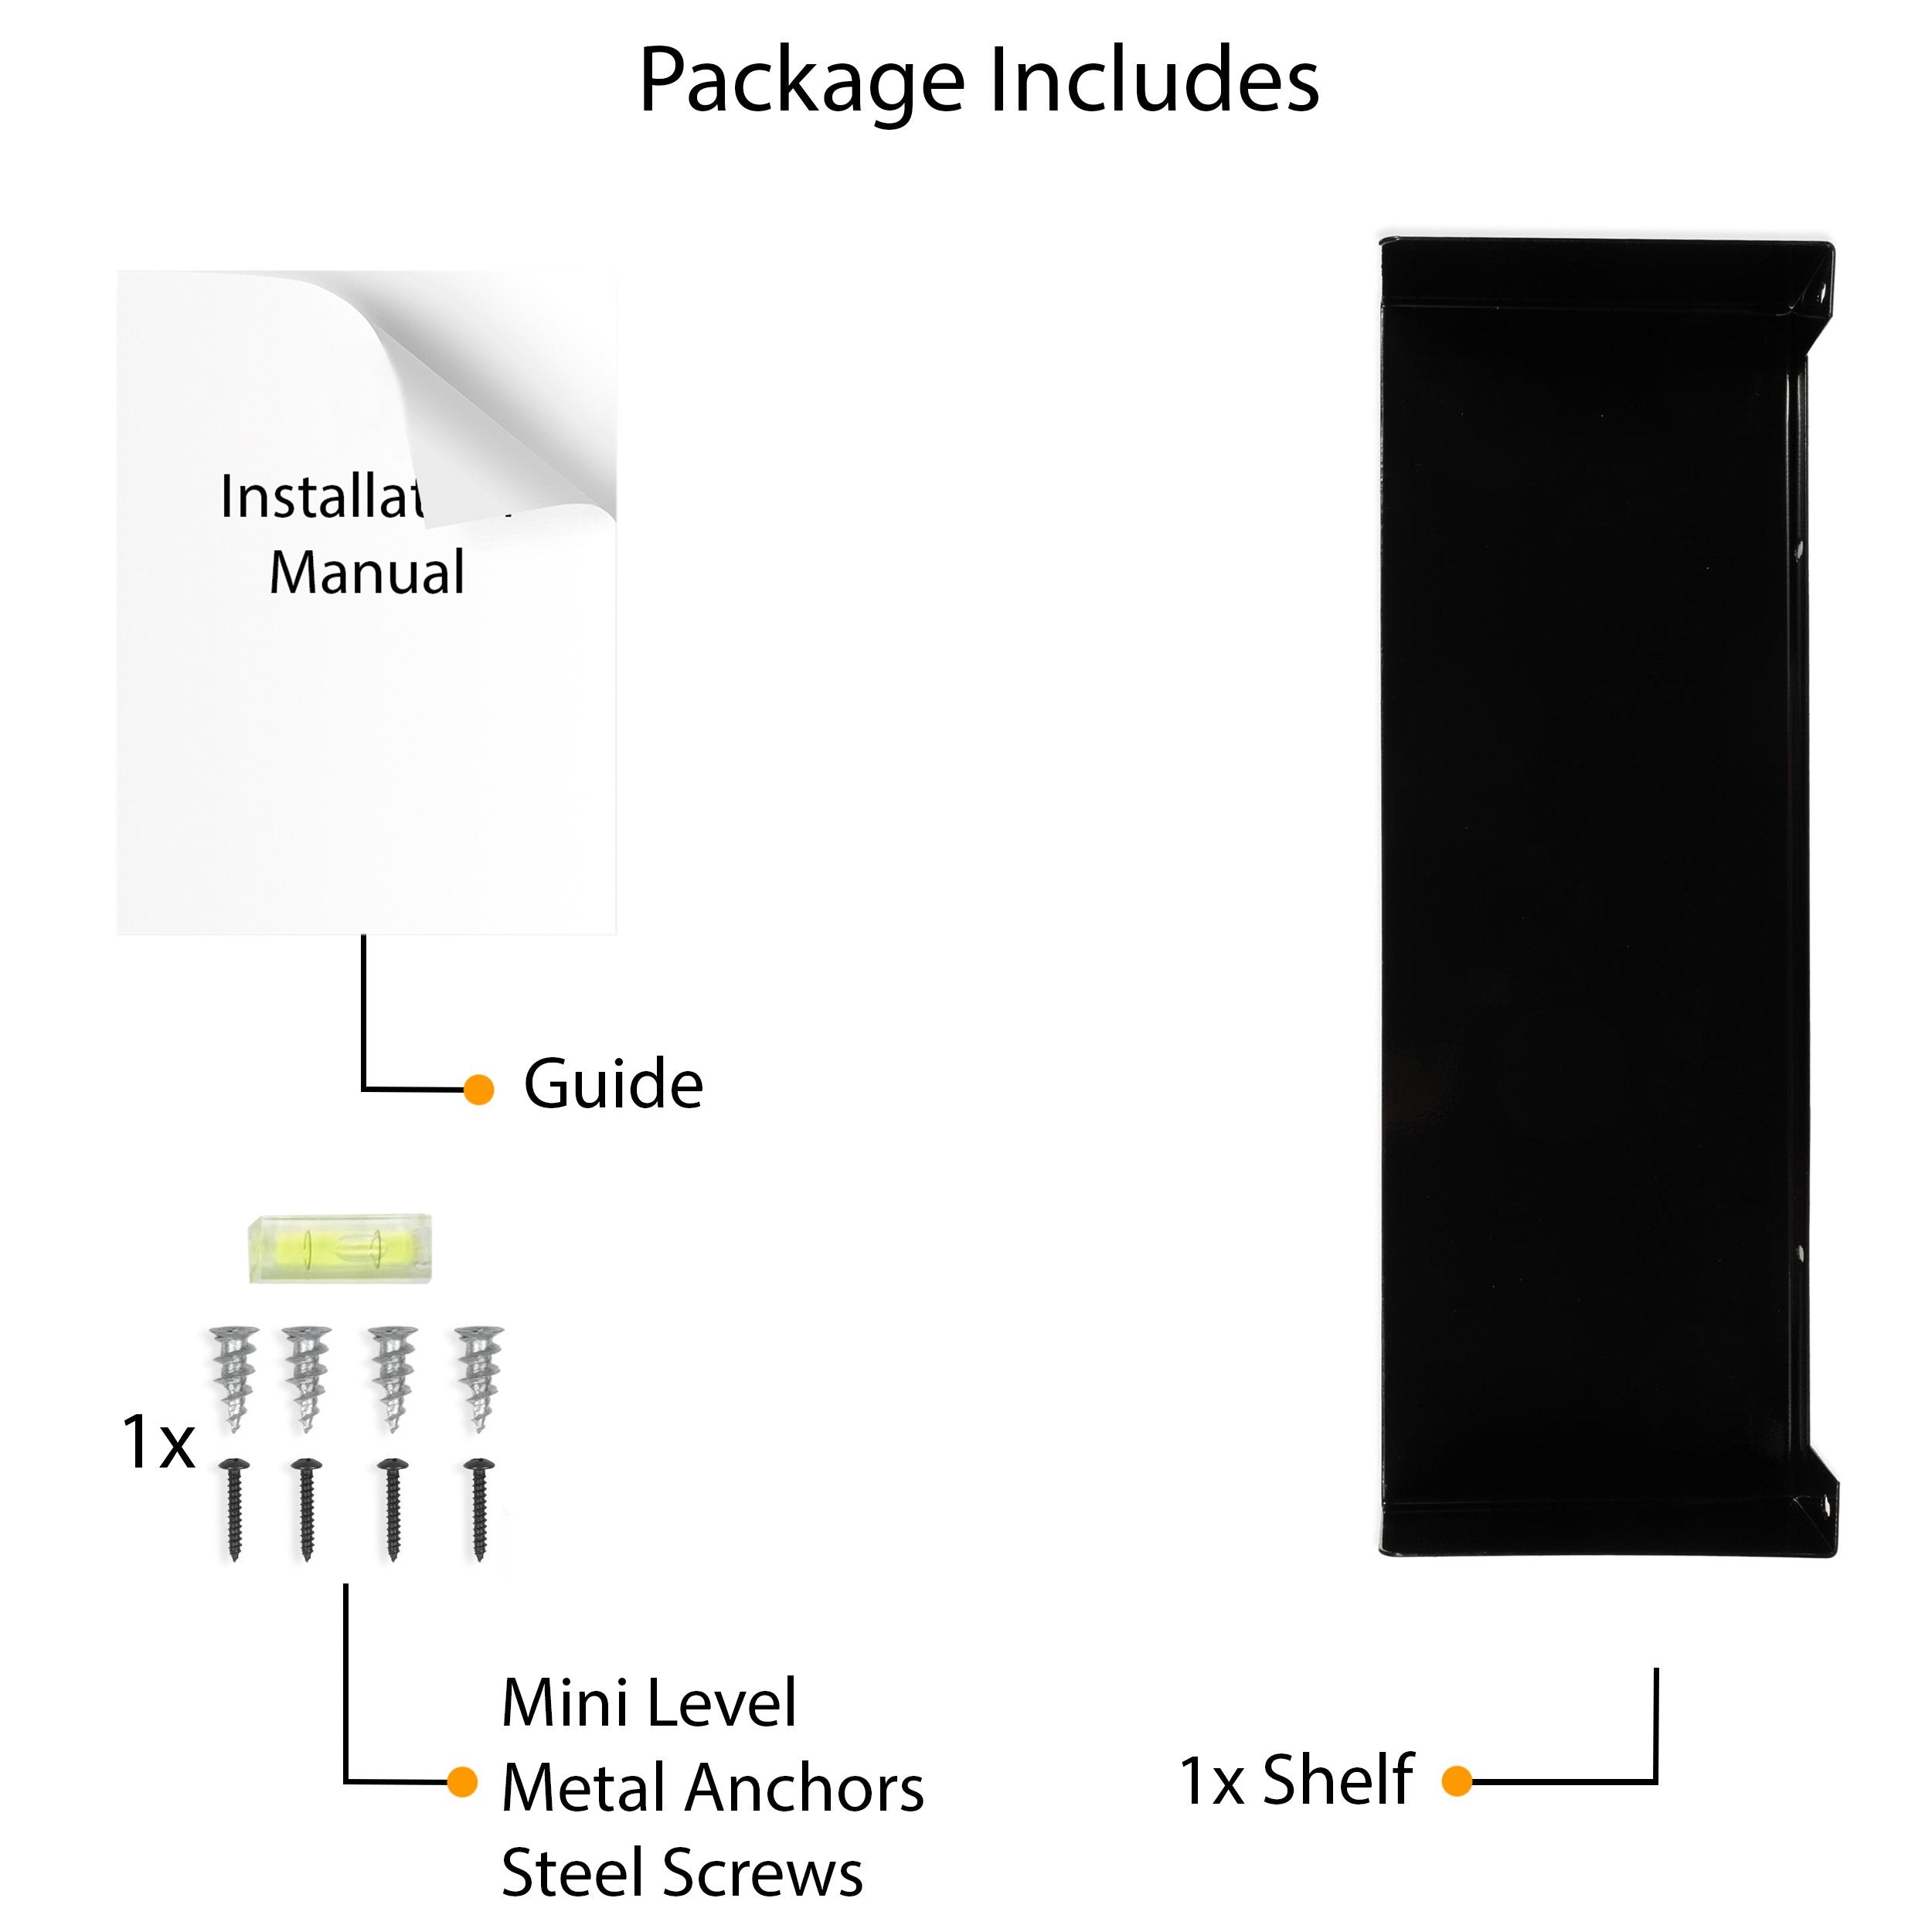 The package of black dvd shelf includes one black metal shelf, an installation manual, a mini level, metal anchors, and steel screws. This ensures an easy and secure setup process for your new wall shelf.